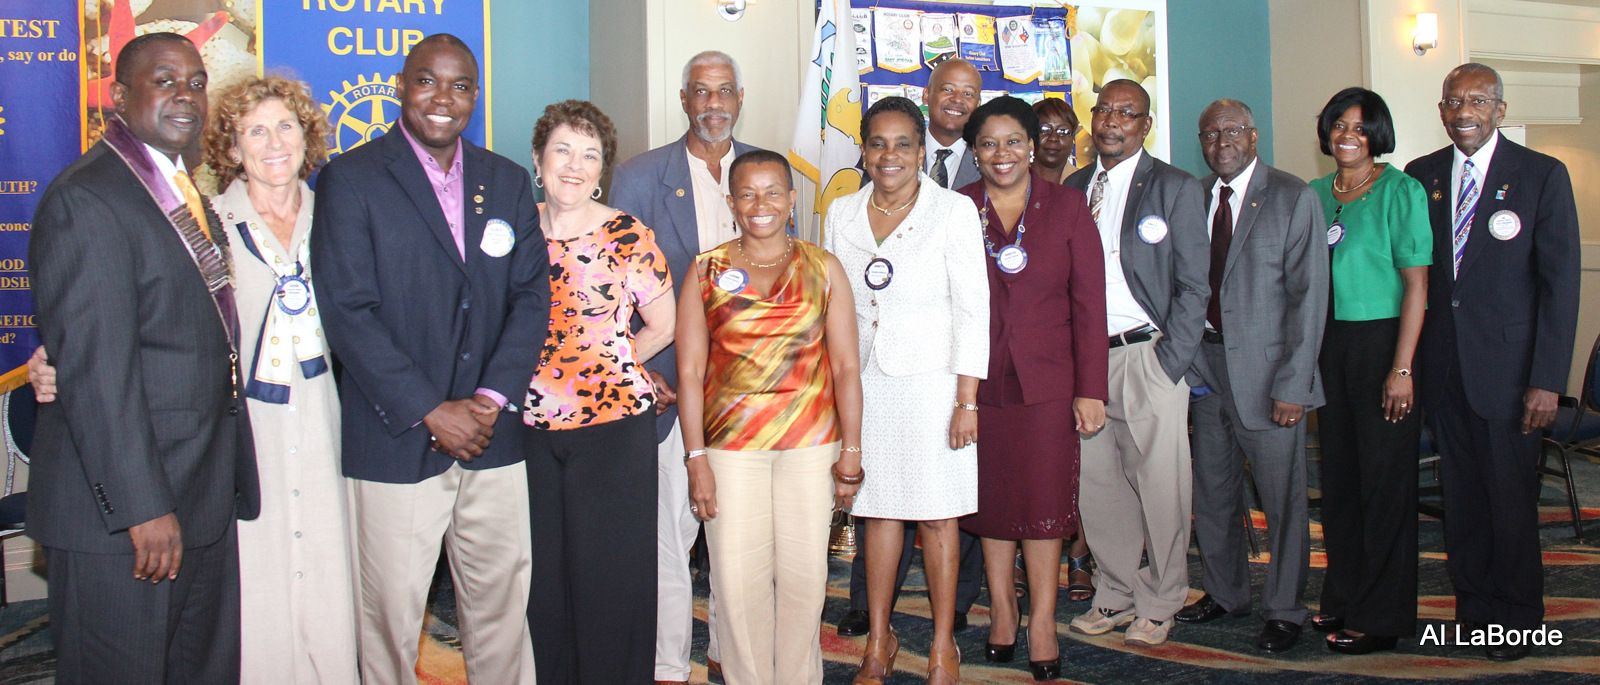 Rotary Club of St. Thomas II installs new officers and board of directors